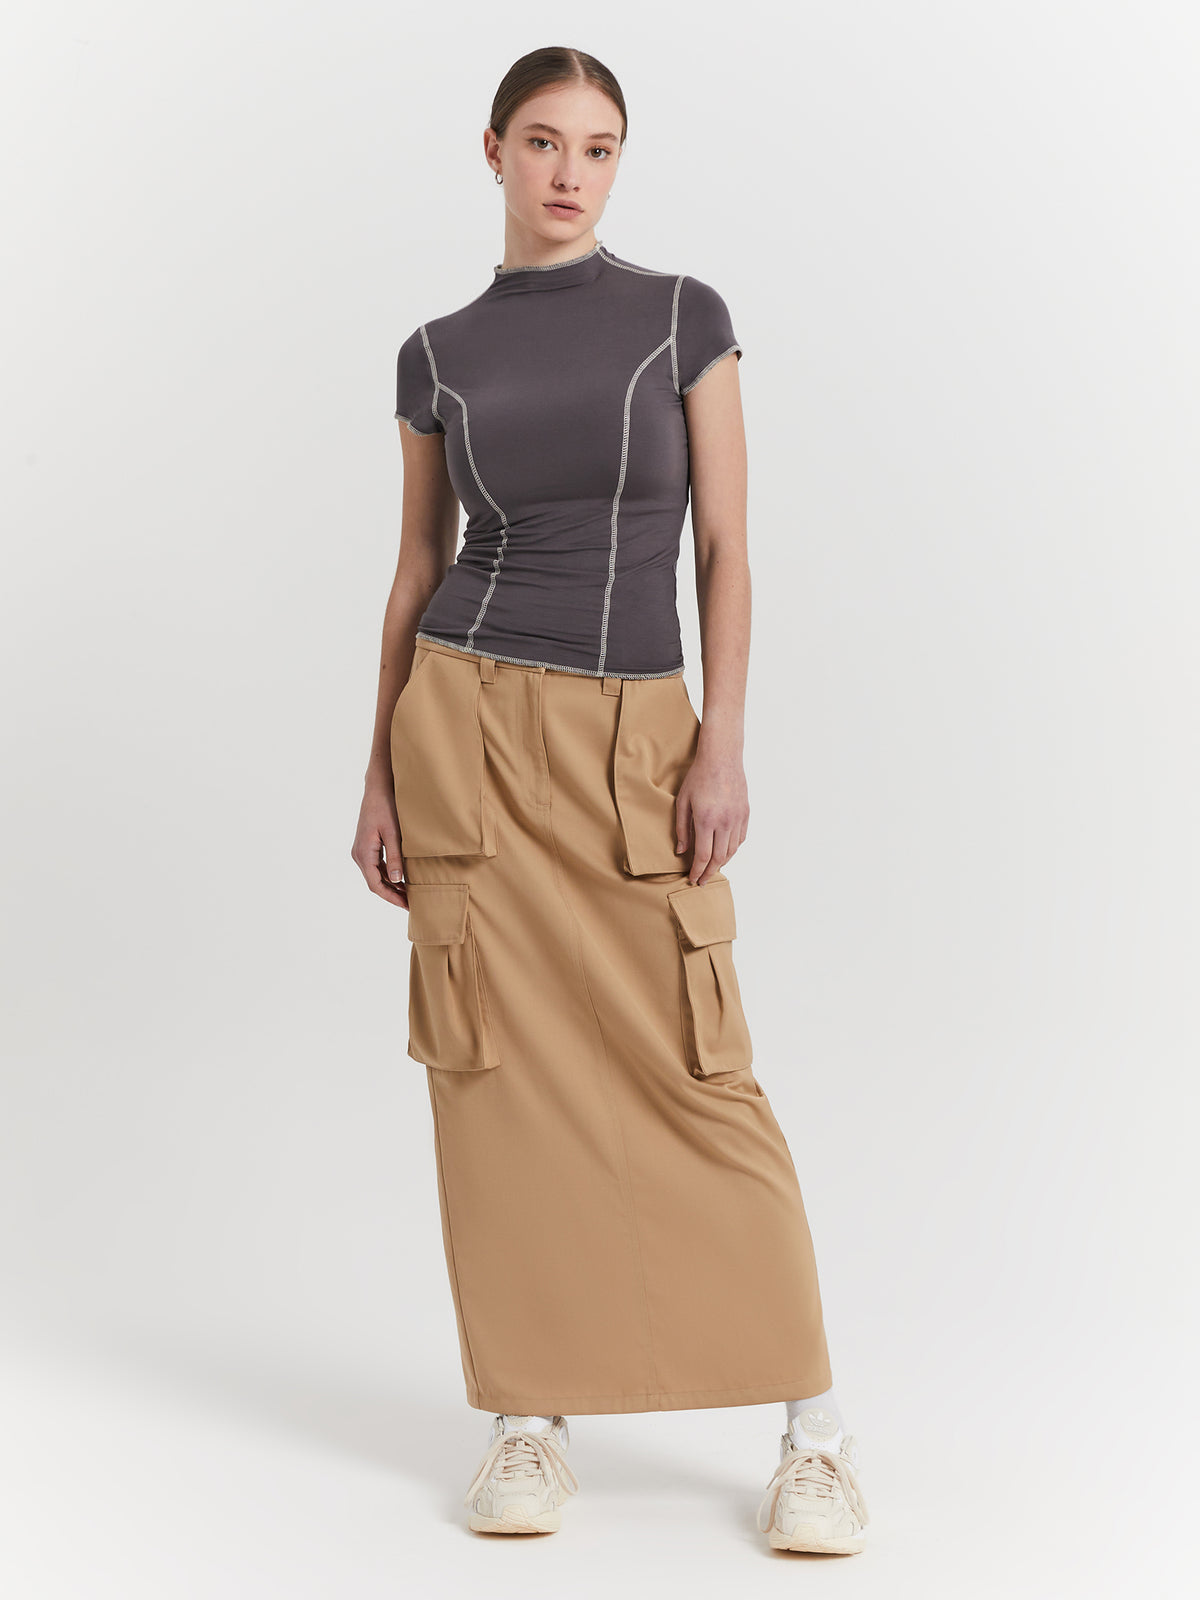 Calle Utility Skirt in Parchment